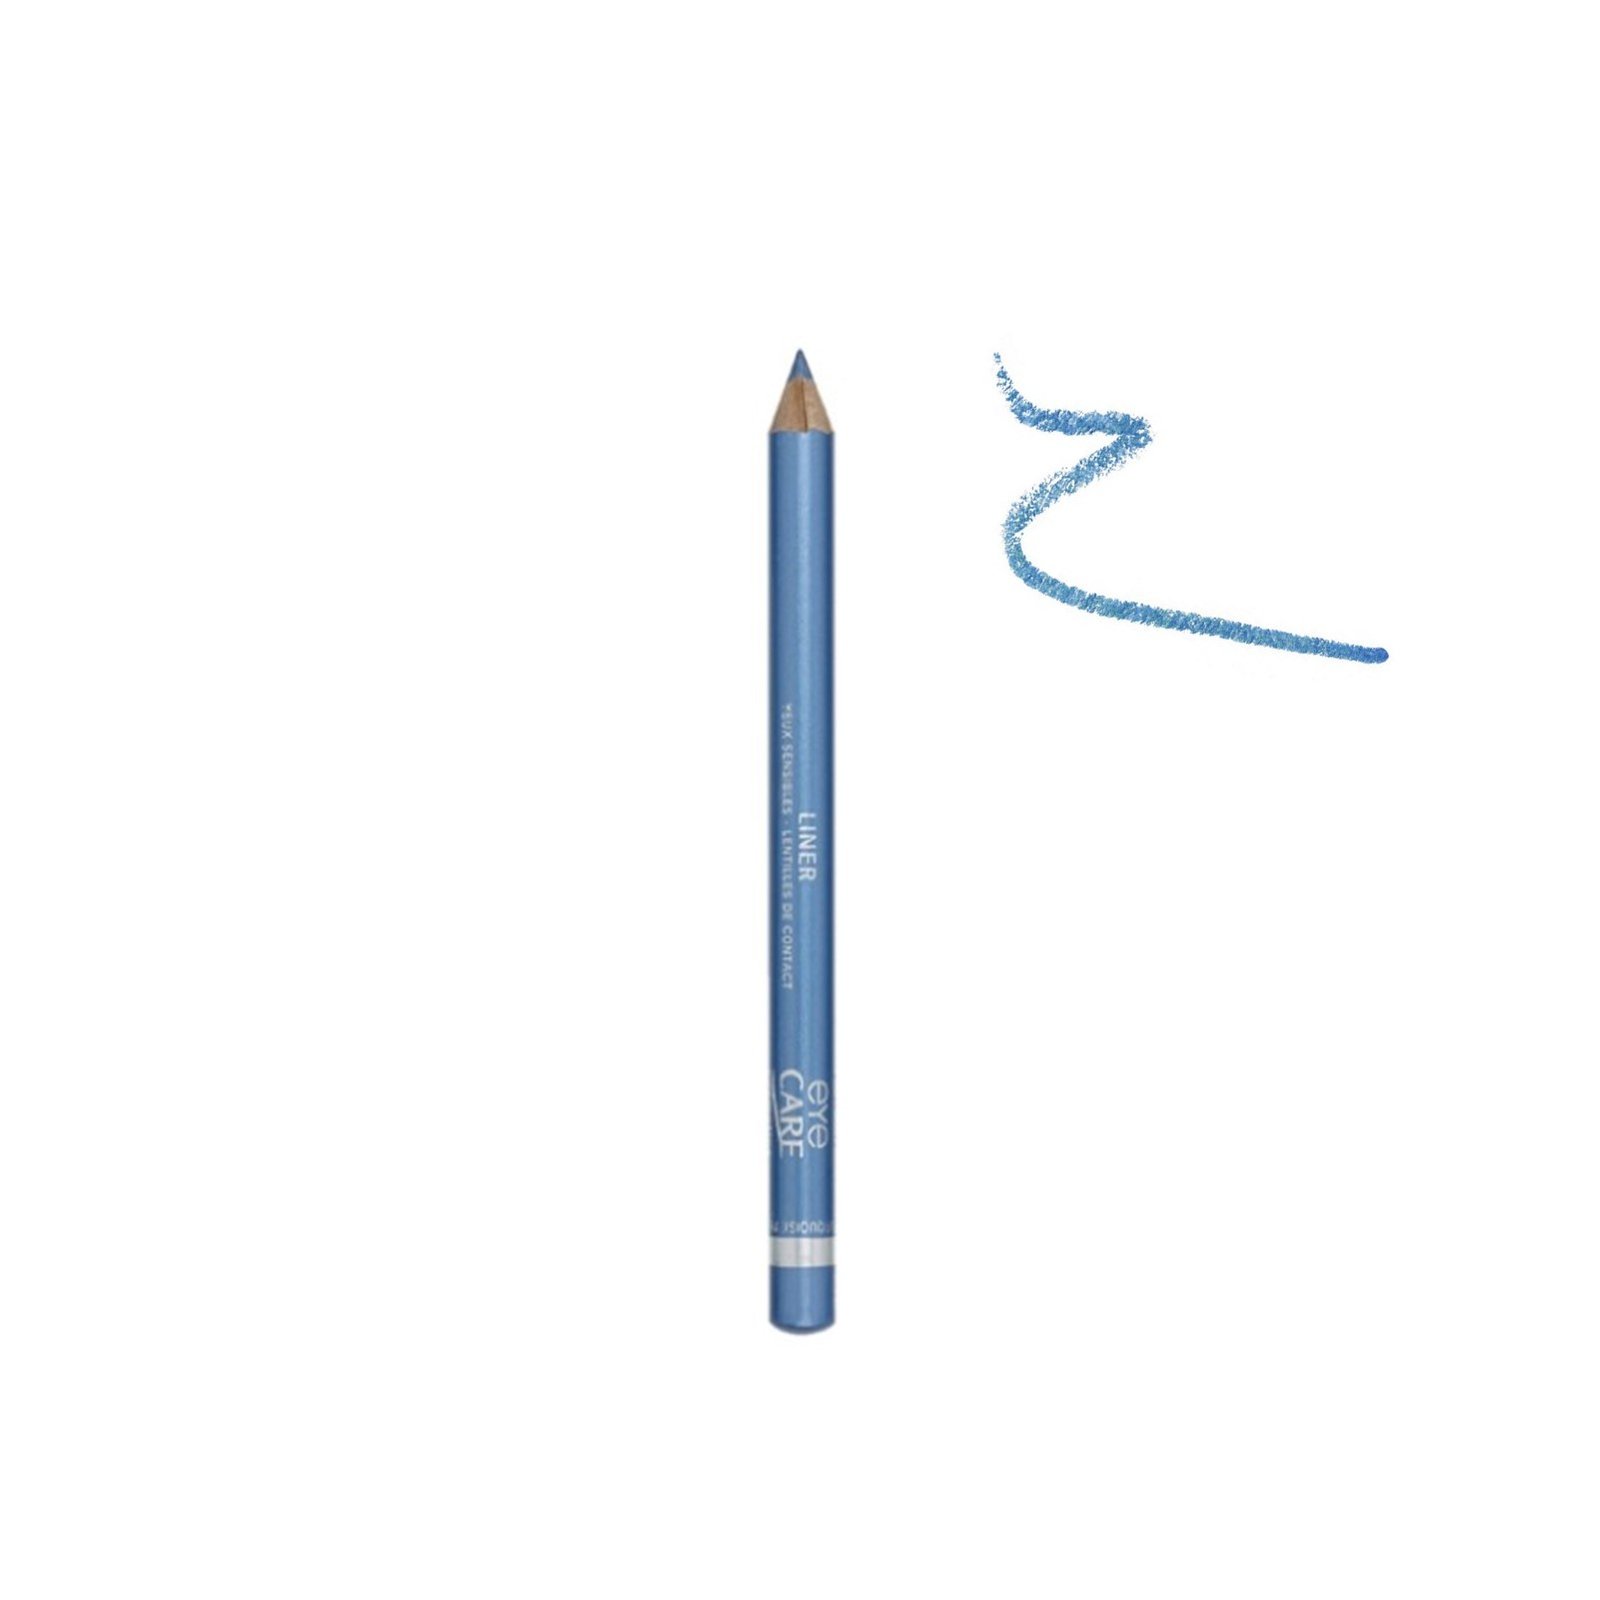 EyeCare Pencil Liner Turquoise 1.1g (0.038 oz)